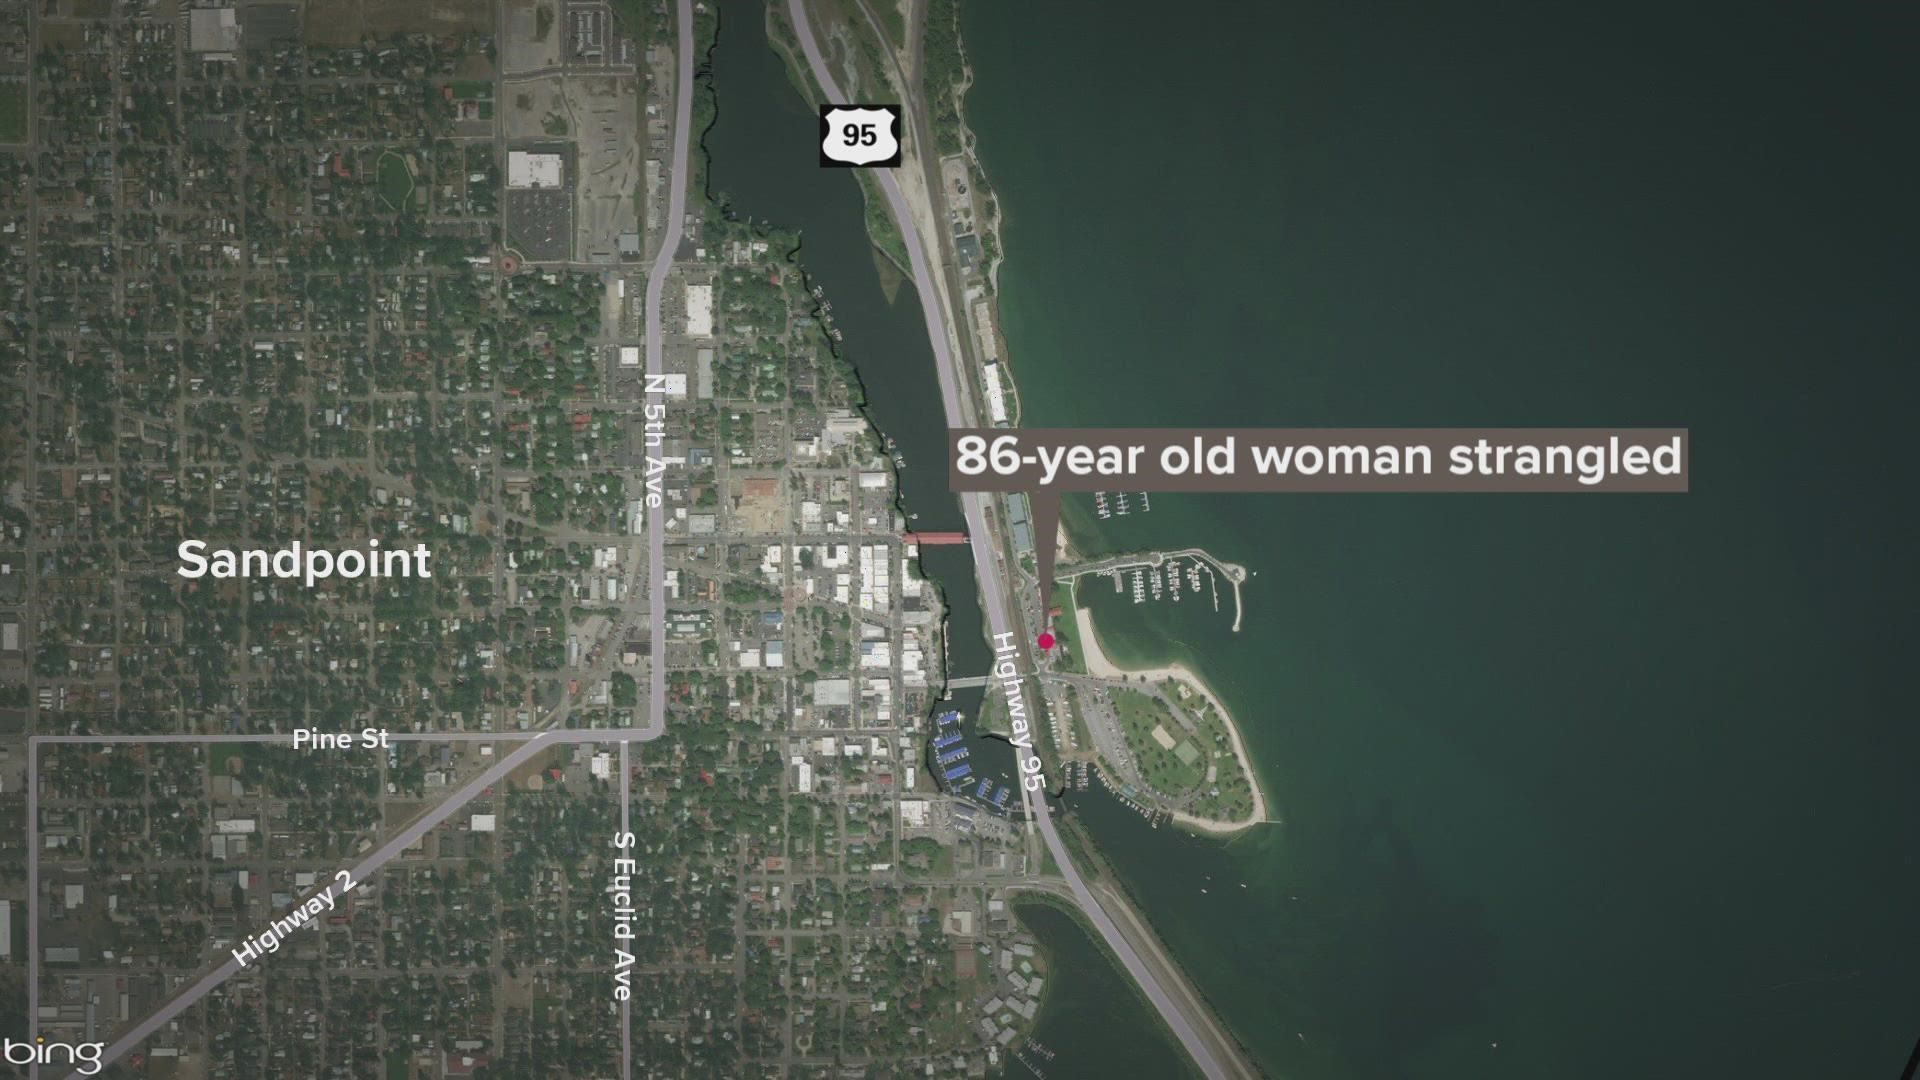 Sandpoint Police say the woman was found dead last night at around 6:30 p.m.